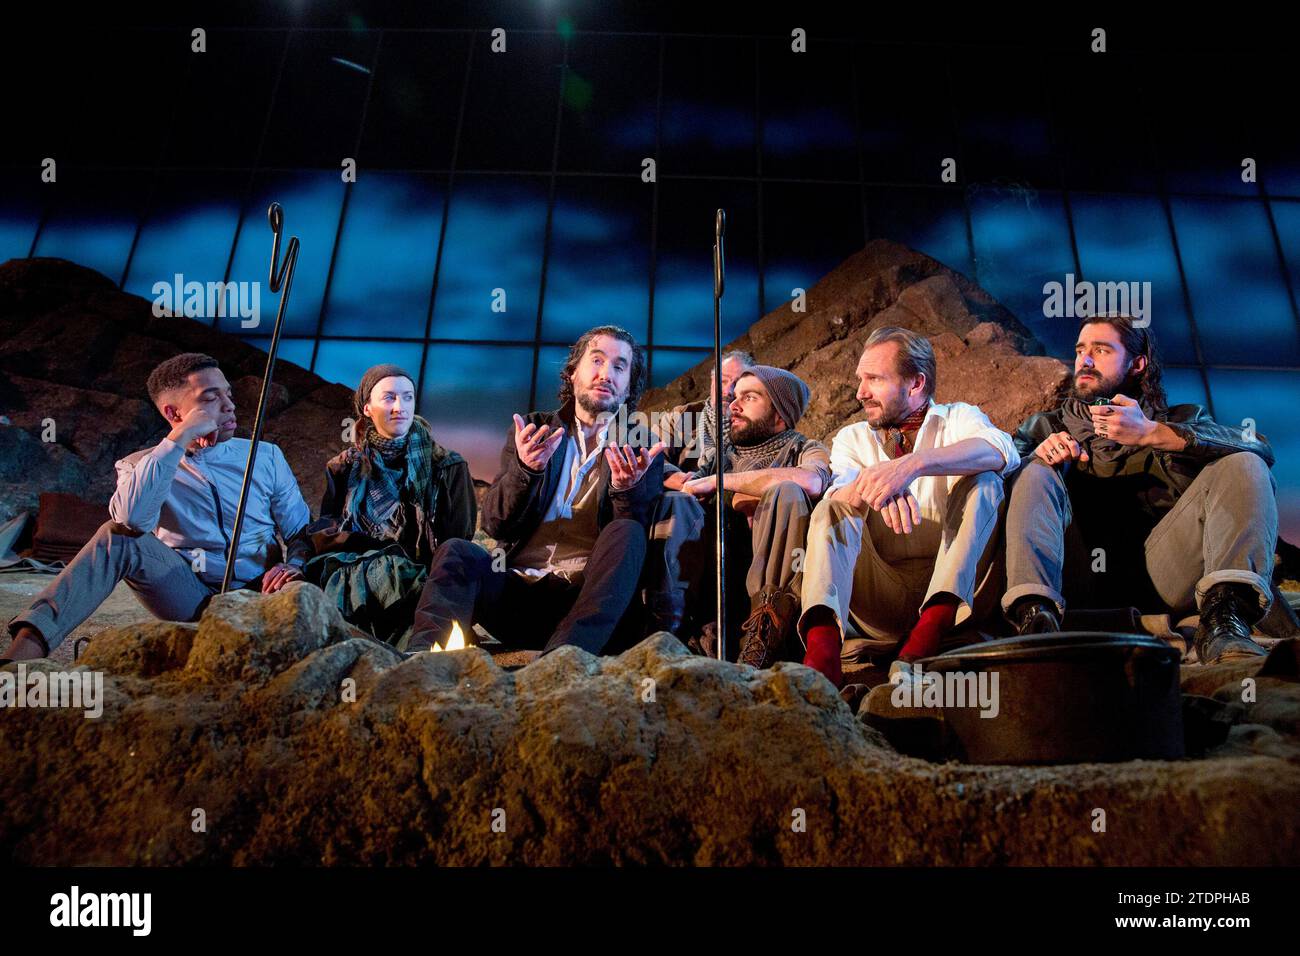 bandit country - l-r: Elliot Barnes-Worrell (Straker), Naomi Cranston (The Sulky Social Democrat)), Tim McMullan (Mendoza), (rear) Colin Haigh (The Anarchist), Arthur Wilson (The Sulky Social Democrat), Ralph Fiennes (Jack Tanner), Nicholas Bishop (The Frenchman) in MAN AND SUPERMAN by Bernard Shaw at the Lyttelton Theatre, National Theatre (NT), London SE1  25/02/2015      design: Christopher Oram  lighting: James Farncombe  director: Simon Godwin Stock Photo